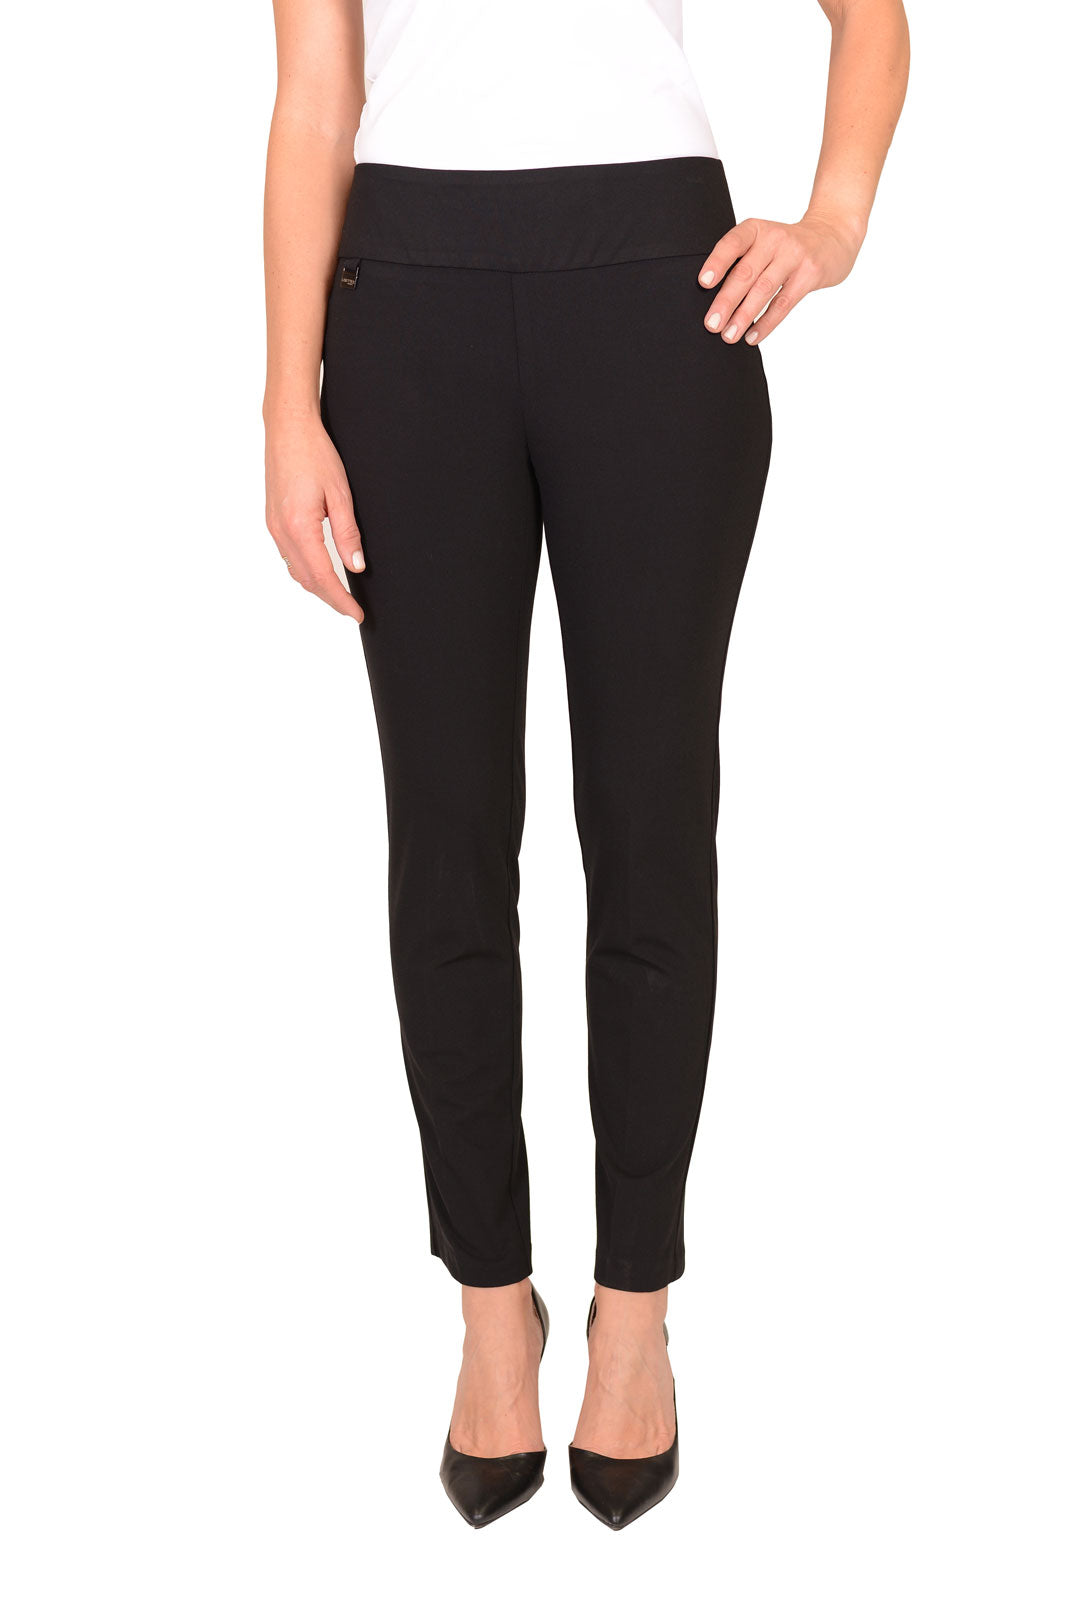 Lisette L Montreal Kathryne Ankle Pant – Evelyn and Arthur